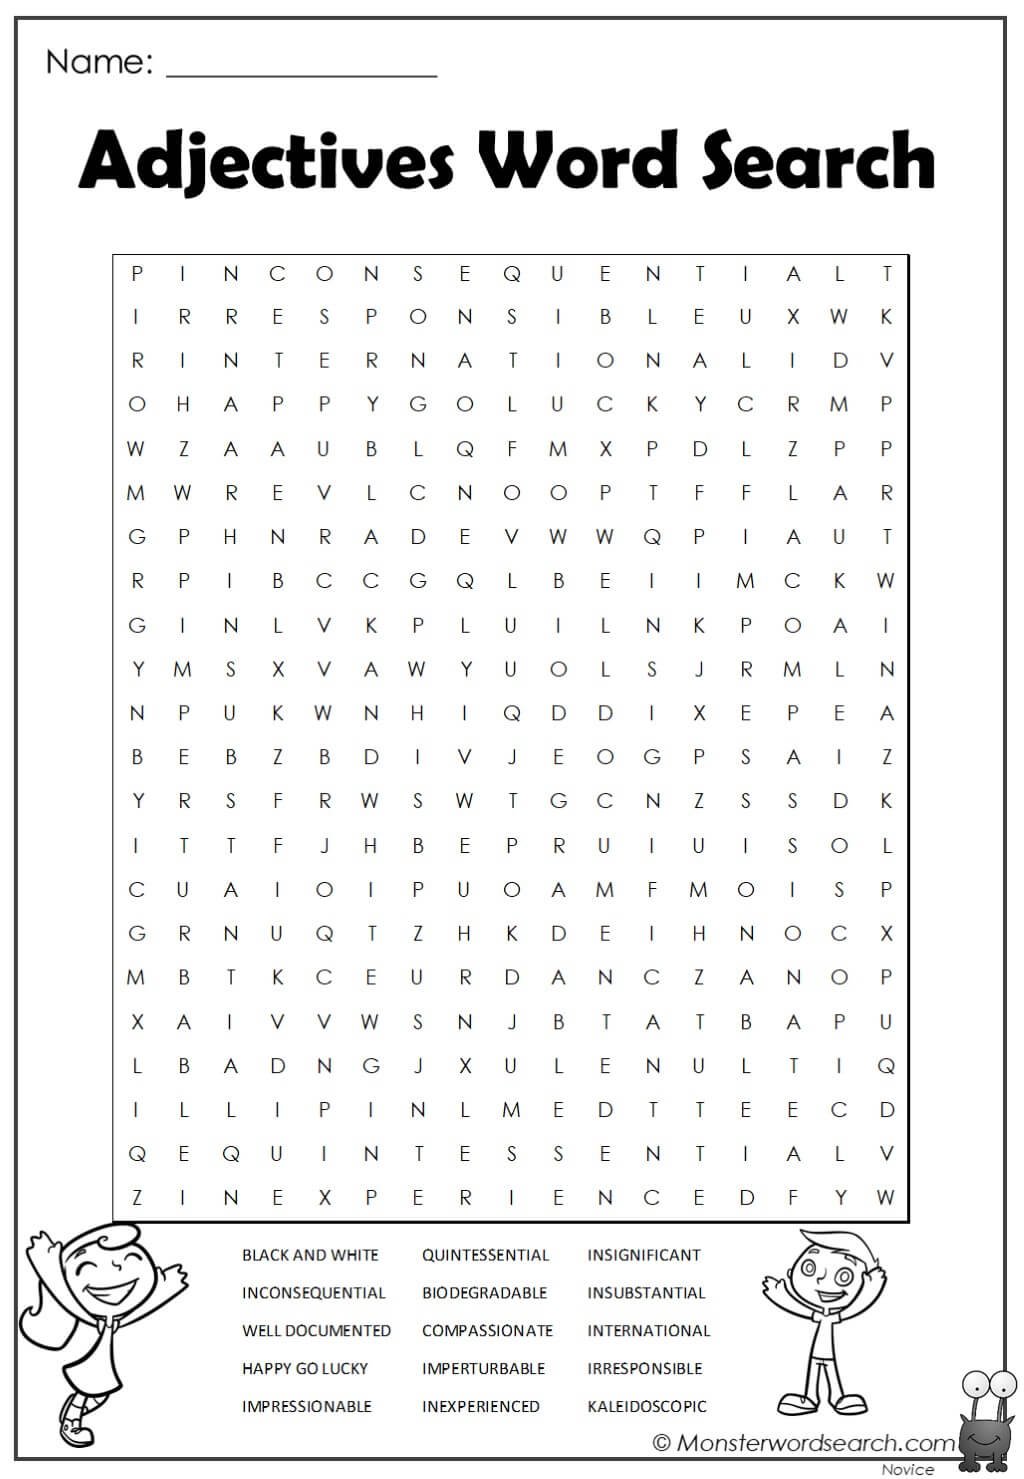 adjectives-word-search-worksheets-worksheetscity